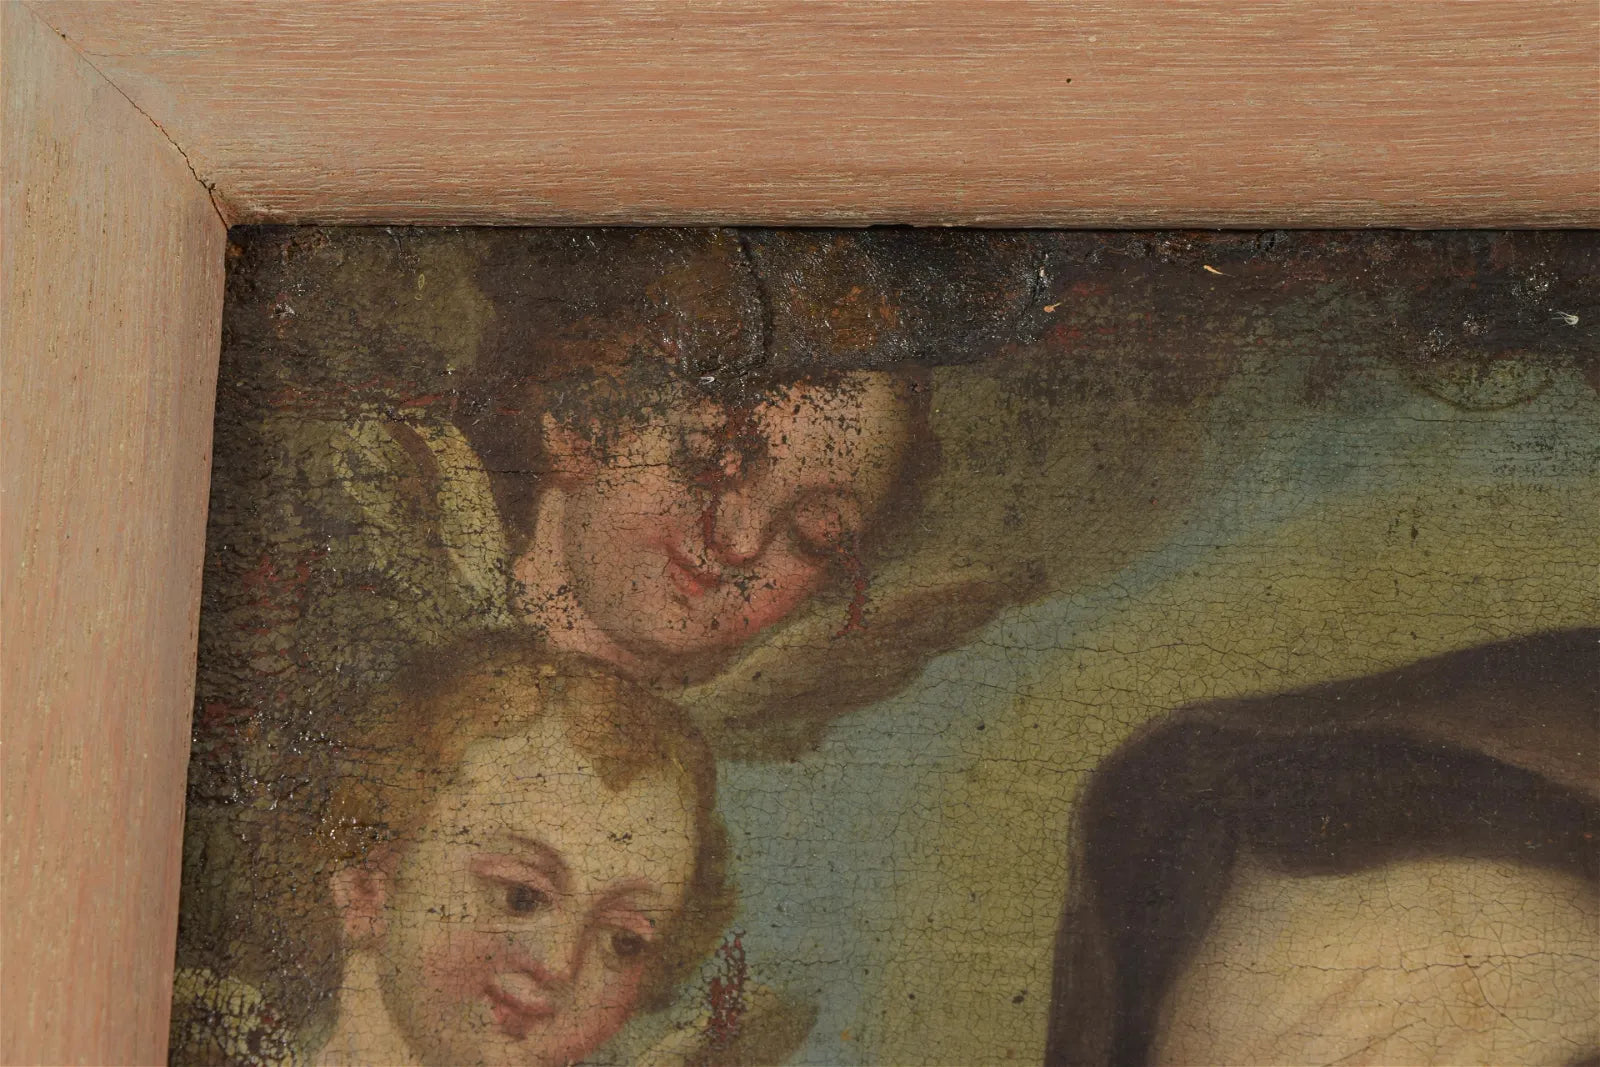 AW608: 18th Century Italian School Old Master - Madonna & Child w/ Angels - Oil on Canvas